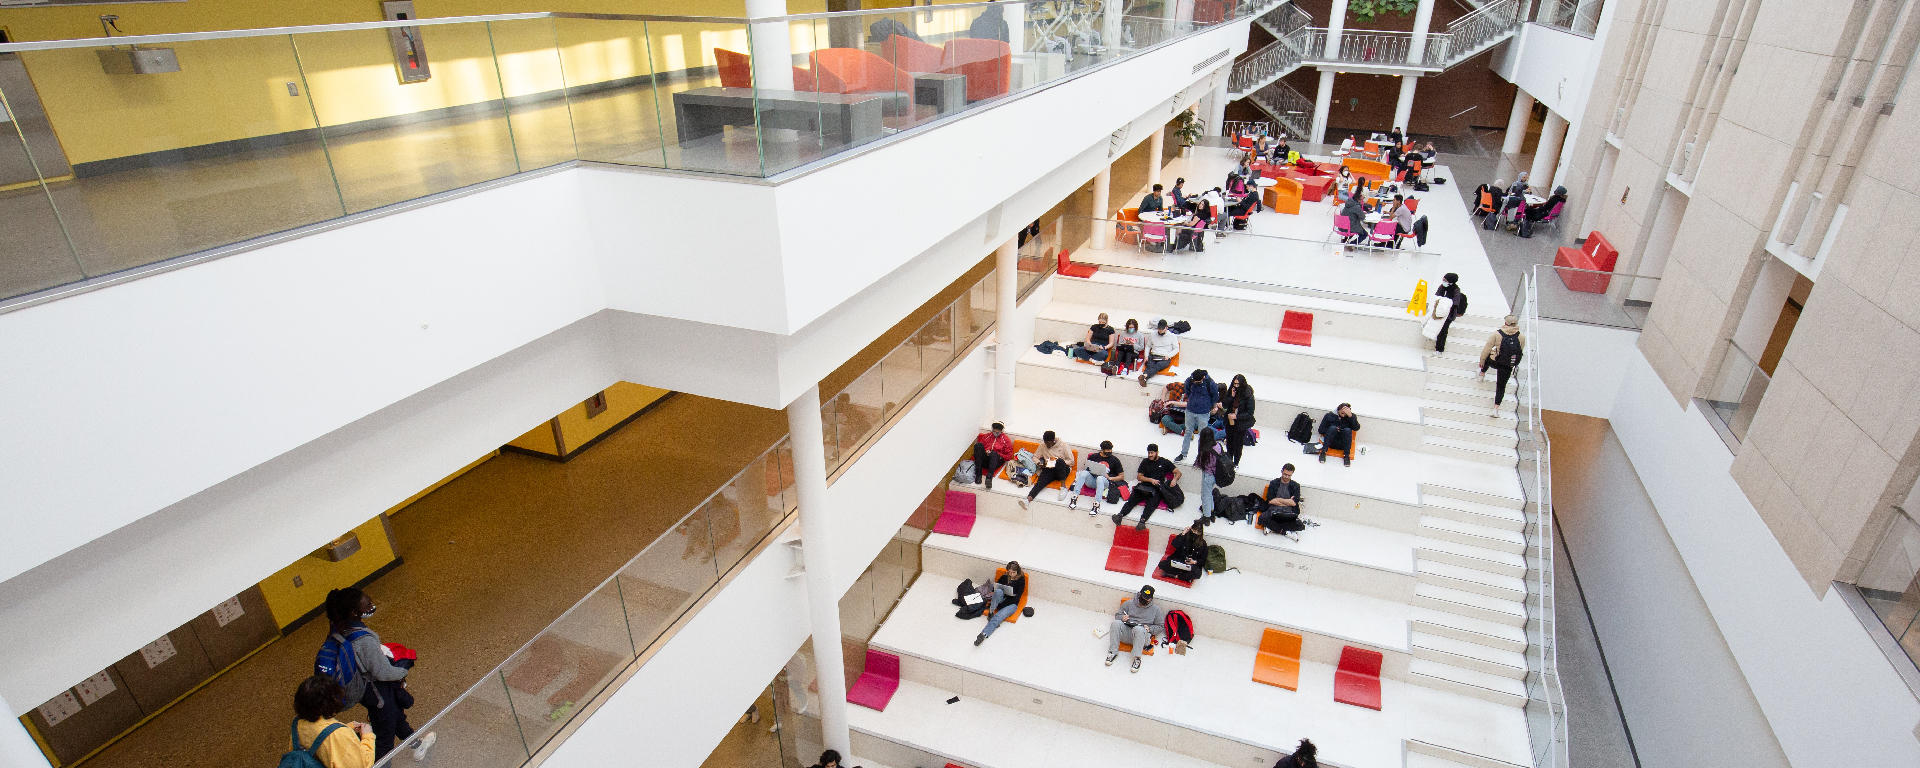 Students sitting in the atrium of an engineering building.